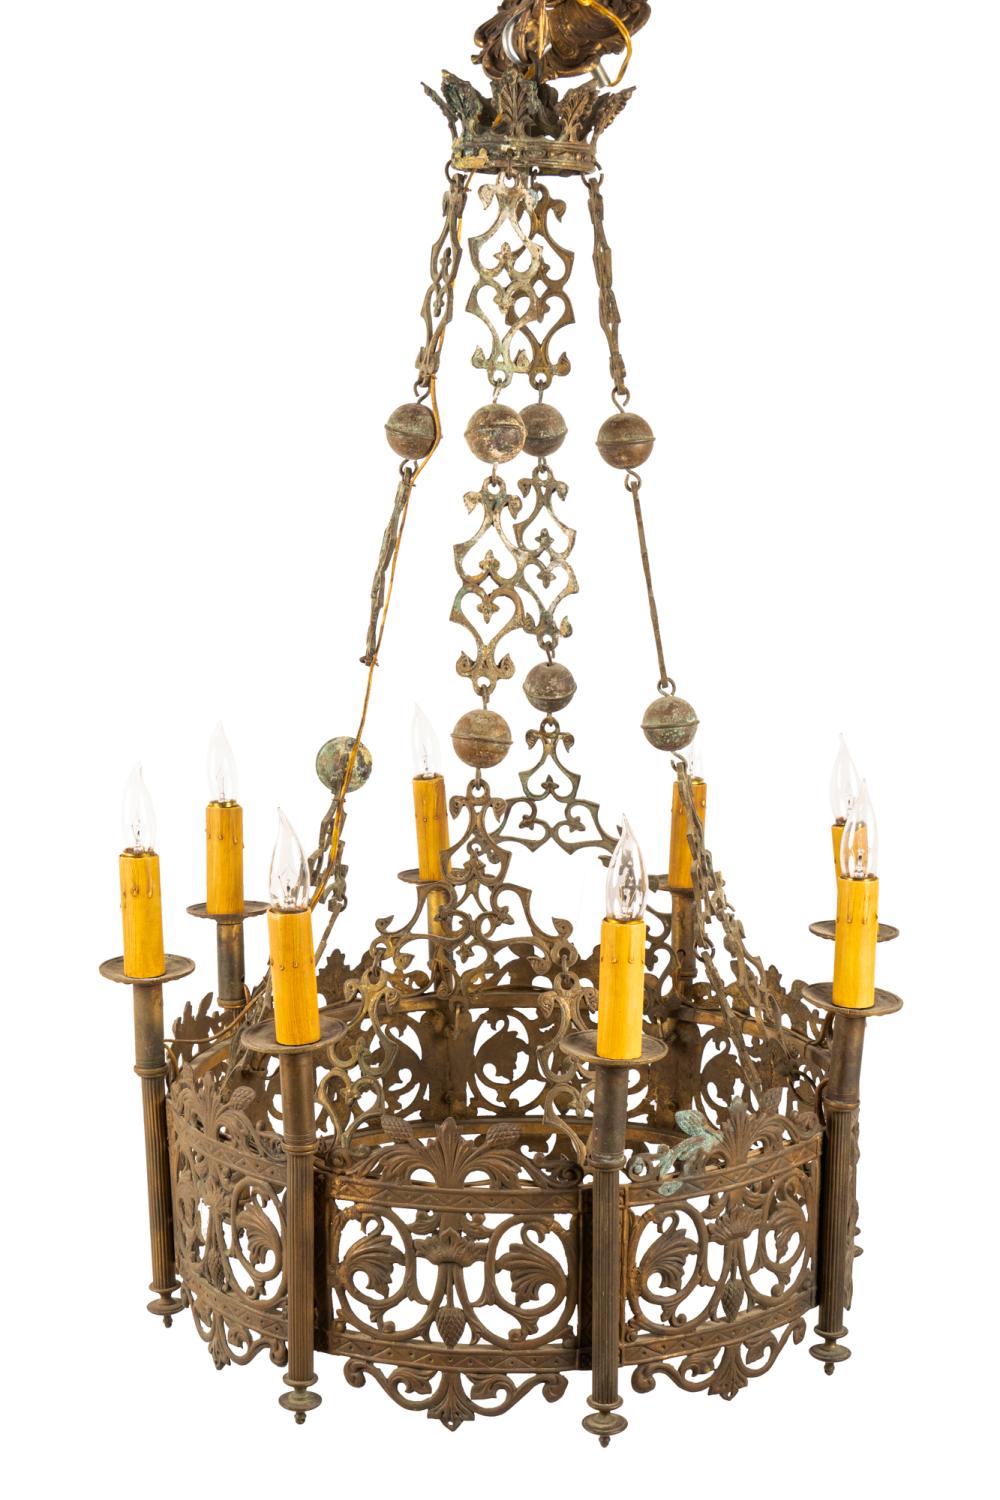 GOTHIC STYLE EIGHT LIGHT CHANDELIERwith 33785a